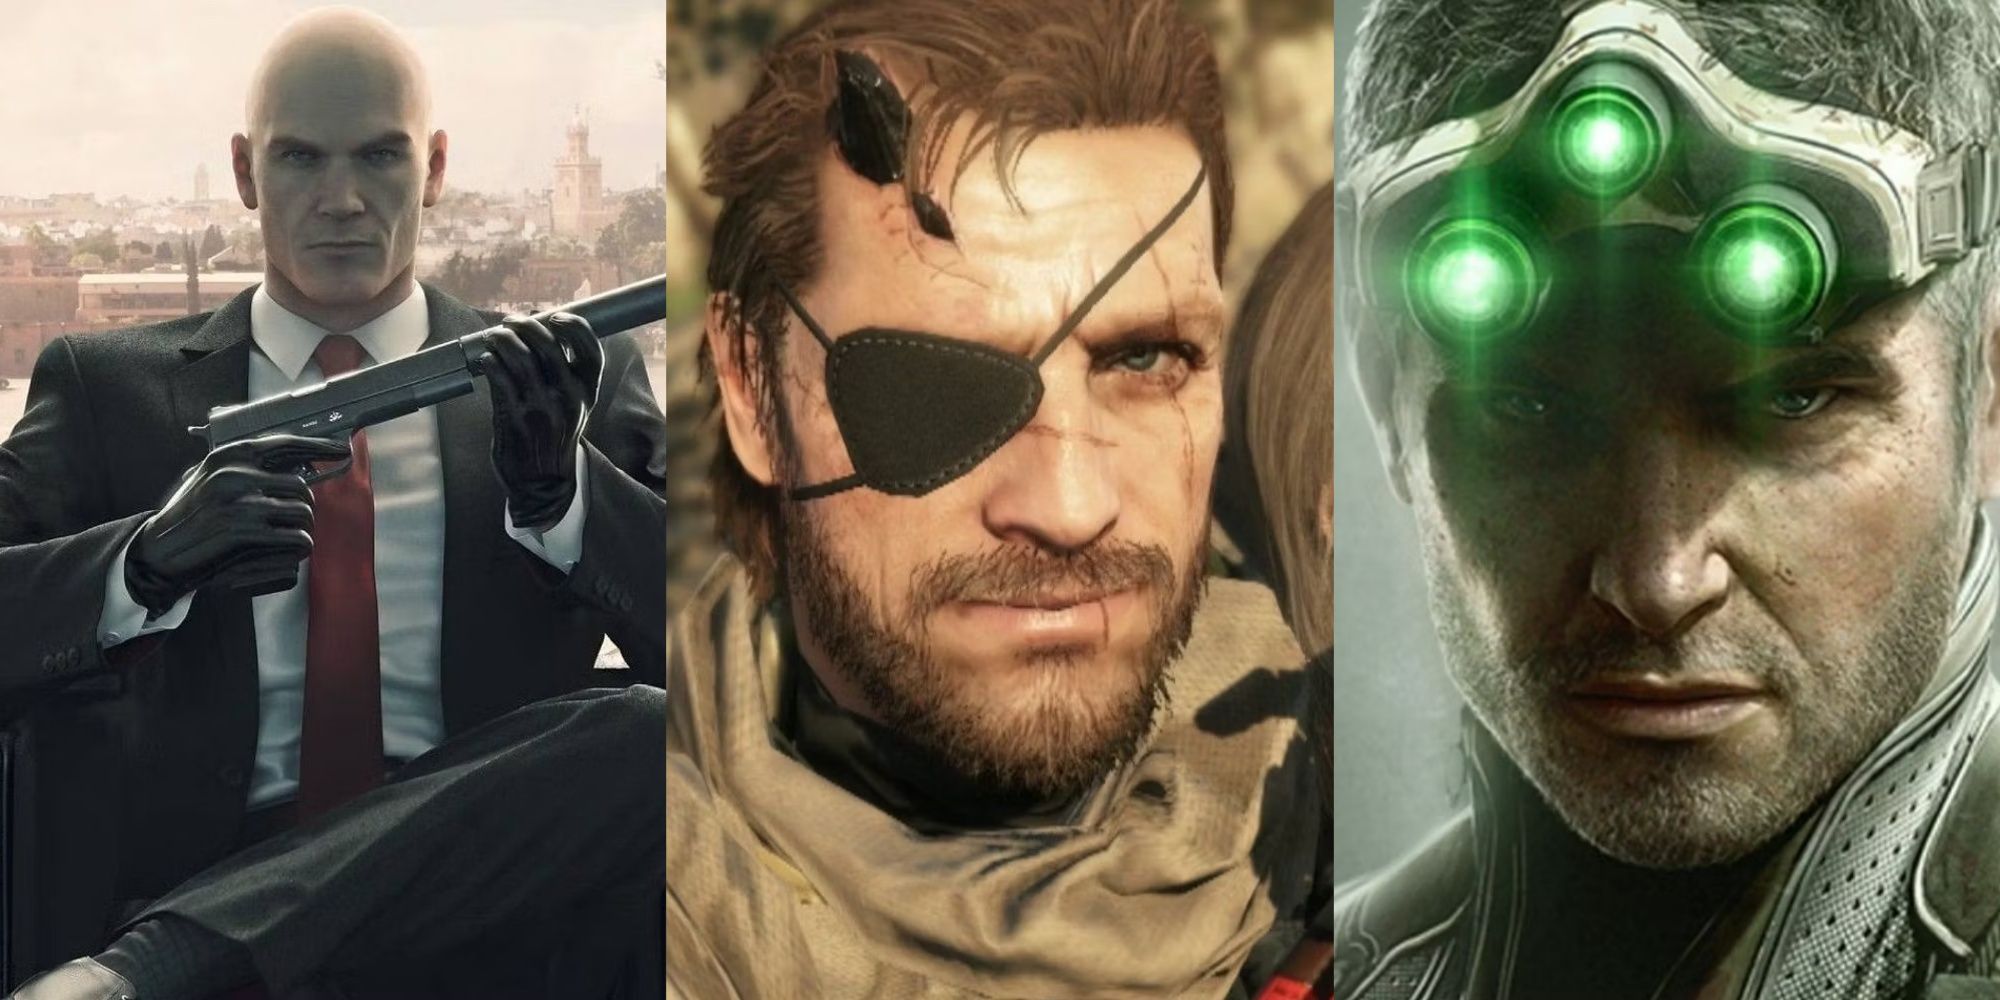 Key art of Agent 47 from Hitman and Sam Fisher from Splinter Cell Blacklist, plus Snake from Metal Gear Solid 5.